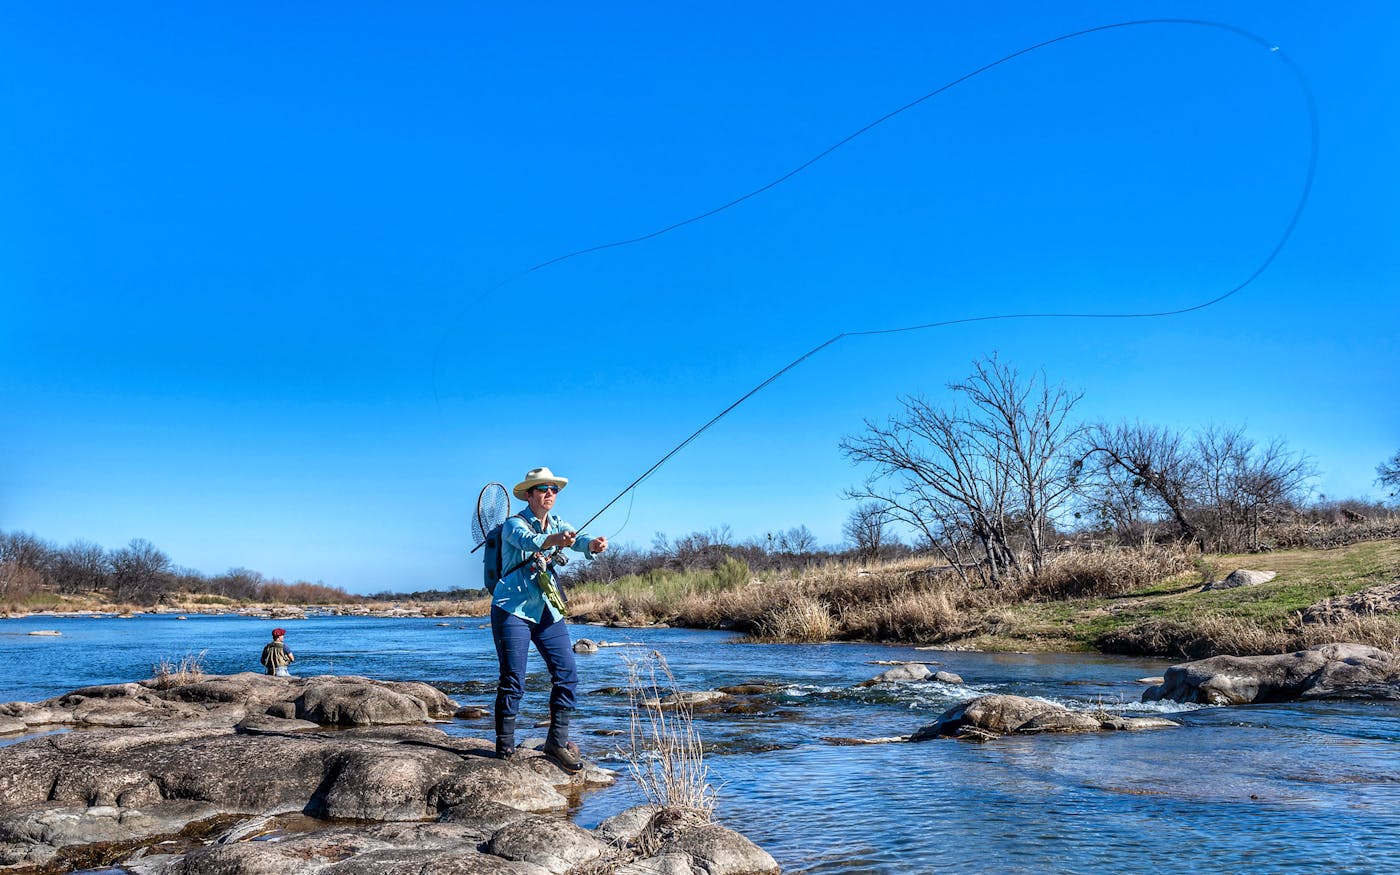 https://img.texasmonthly.com/2023/02/texas-women-fly-fishers-cari-ray.jpg?auto=compress&crop=faces&fit=crop&fm=jpg&h=1400&ixlib=php-3.3.1&q=45&w=1400